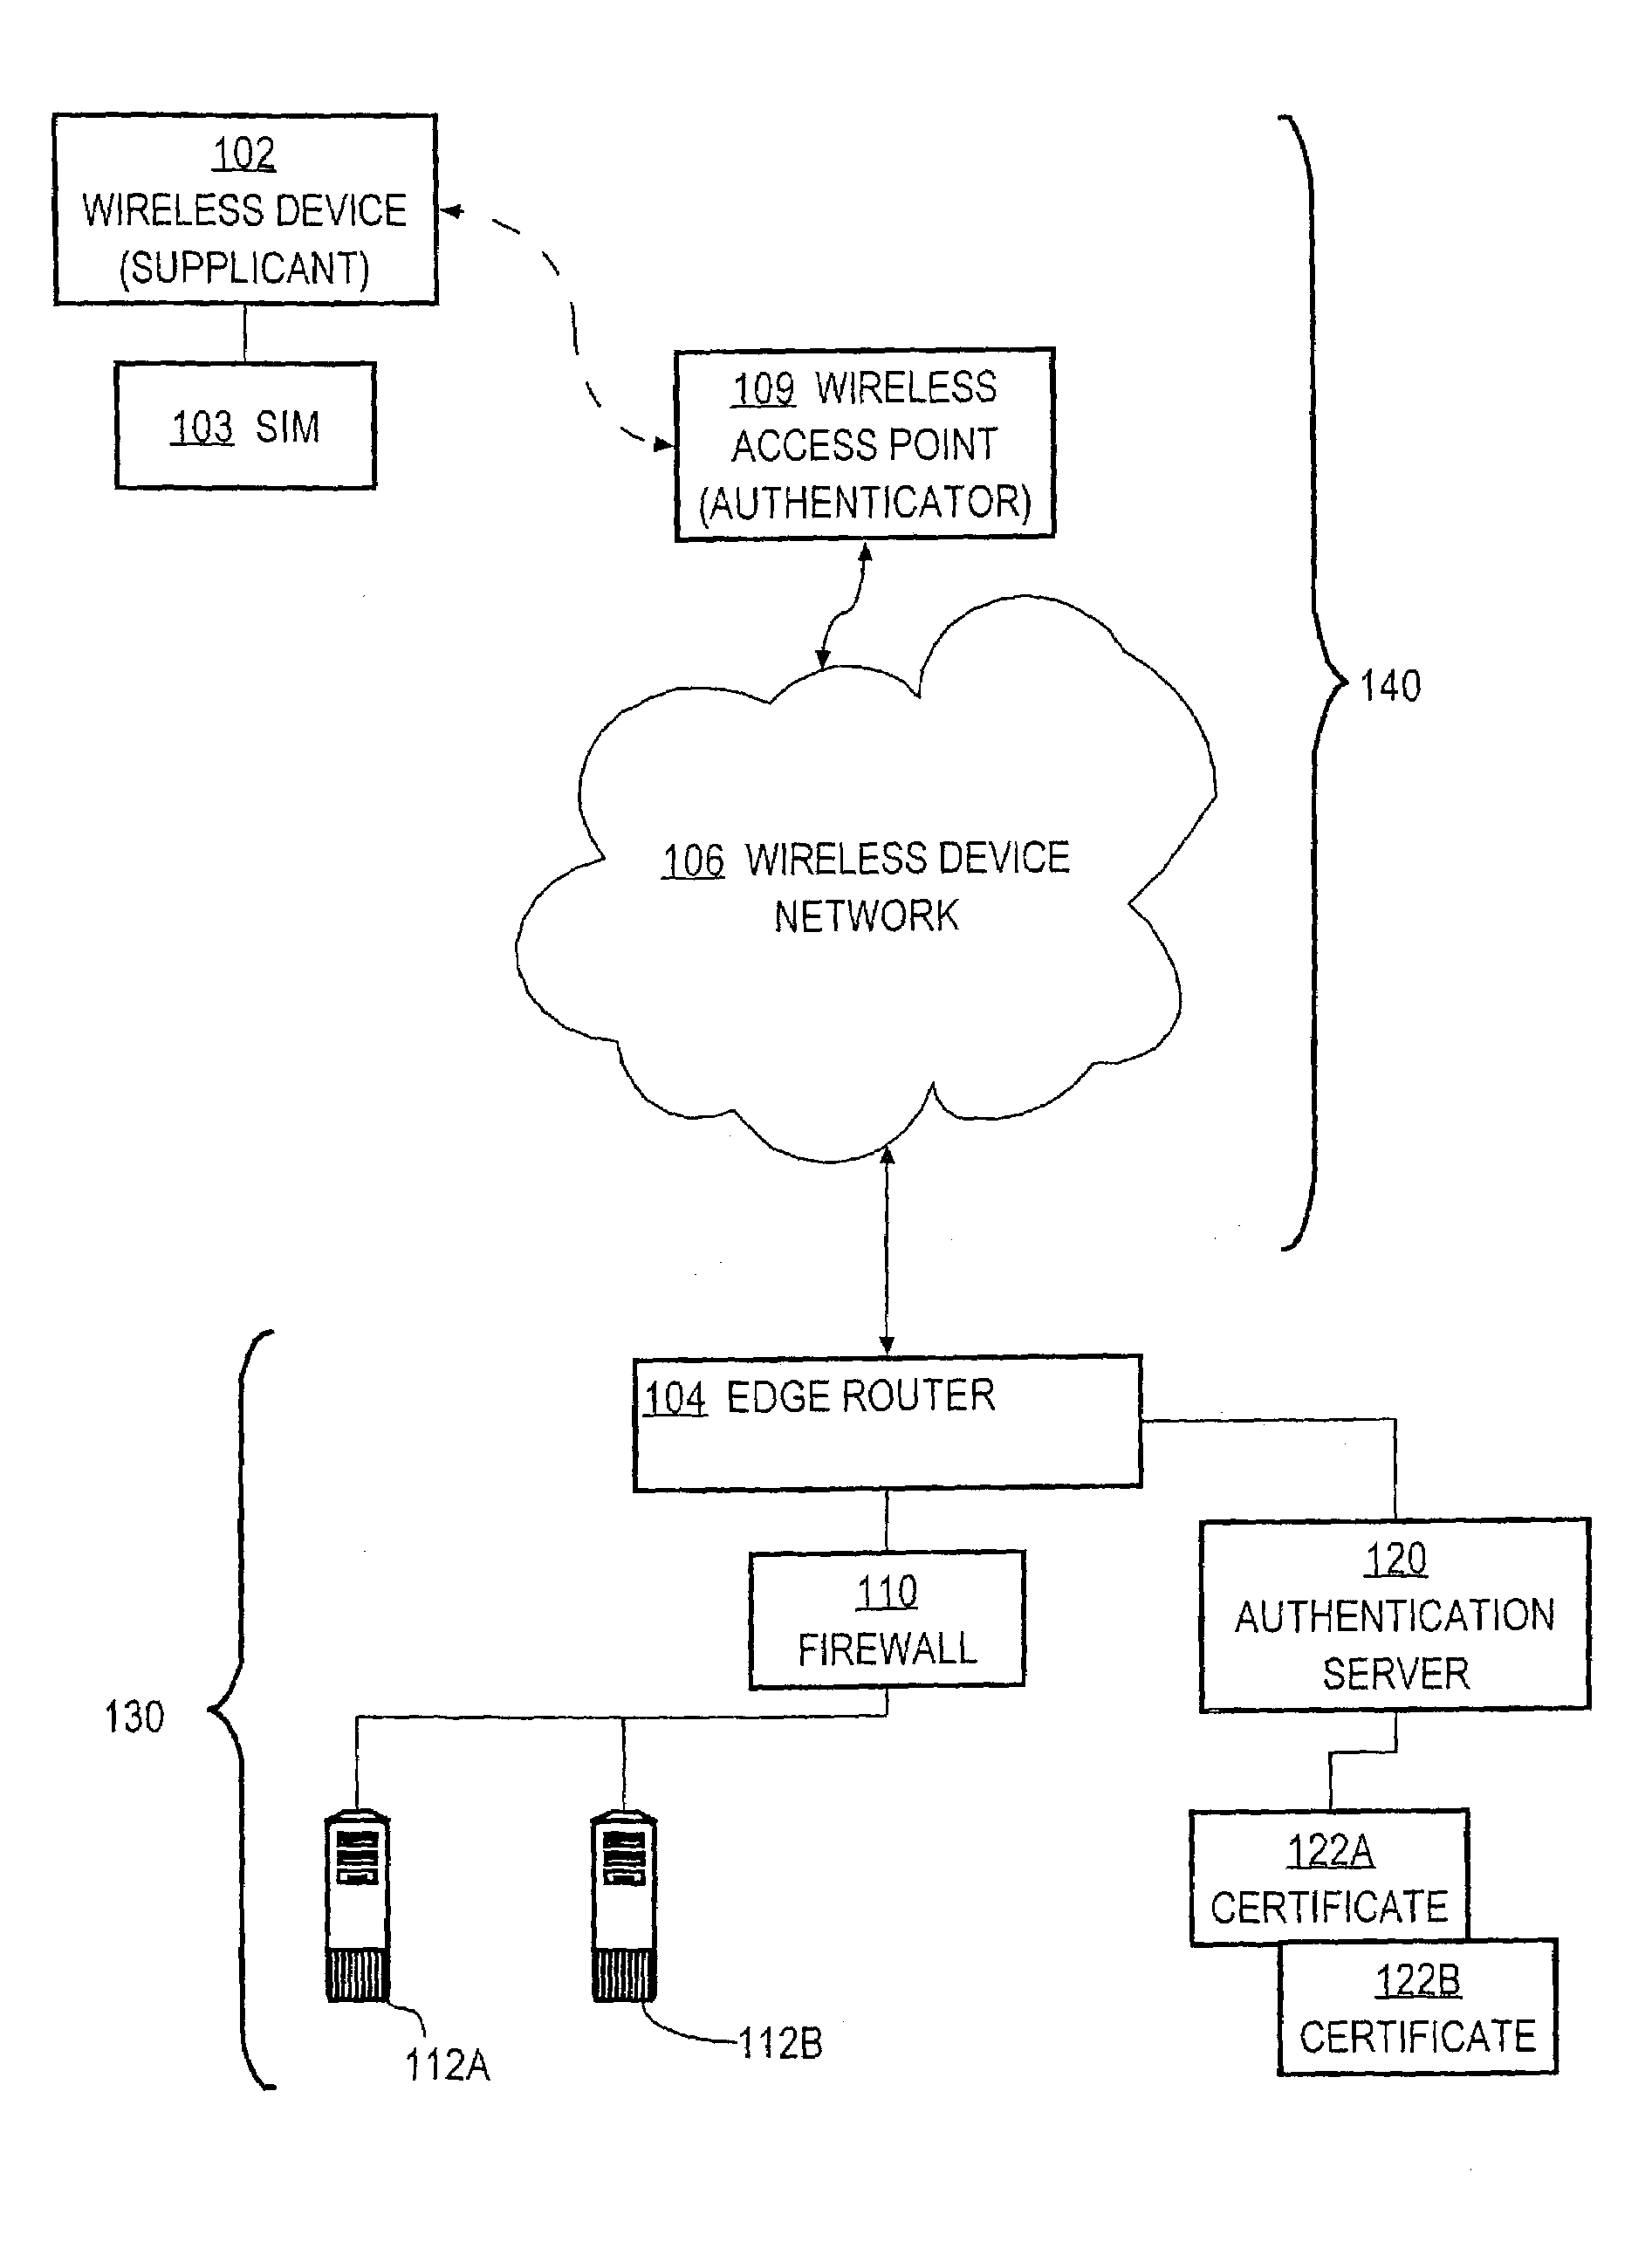 Method and apparatus for communicating credential information within a network device authentication conversation